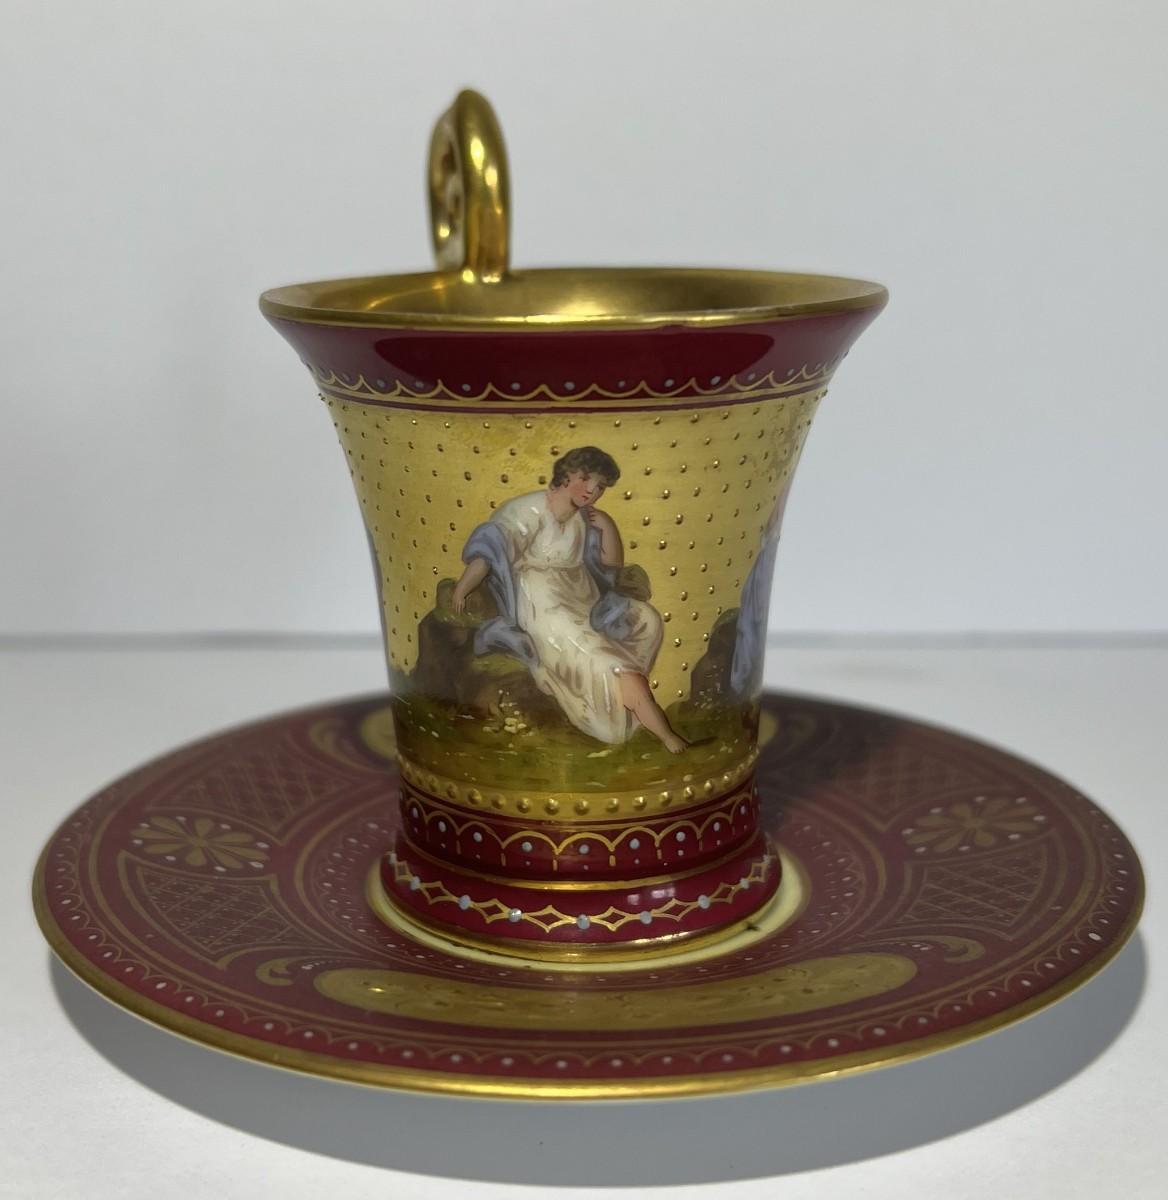 Photo 2 of Antique RARE Royal Vienna Beehive Red/Gold Cameo Teacup & Saucer c1875 3" Cup & 